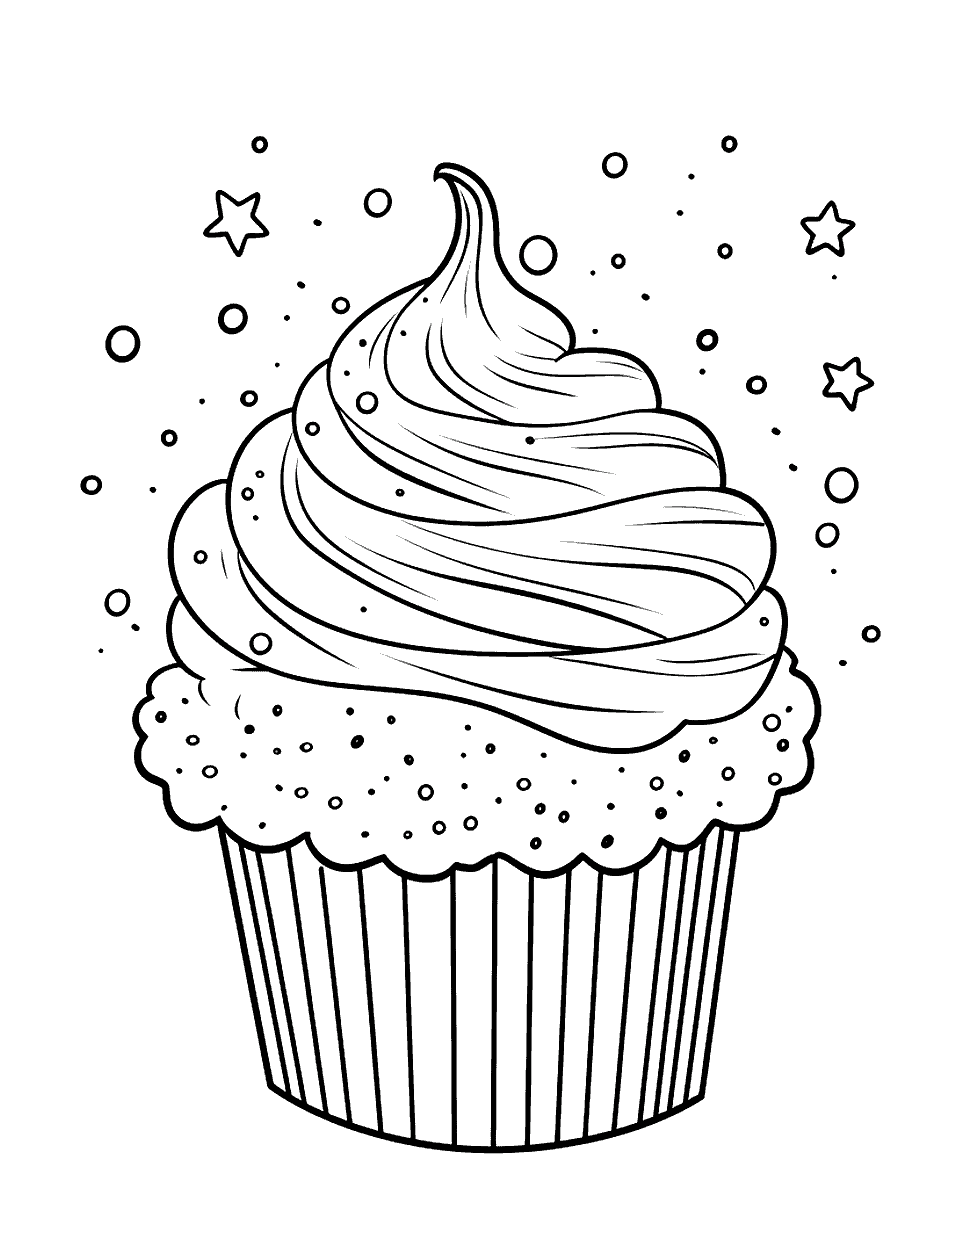 Sprinkle Explosion Cupcake Coloring Page - A cupcake covered in sprinkles.